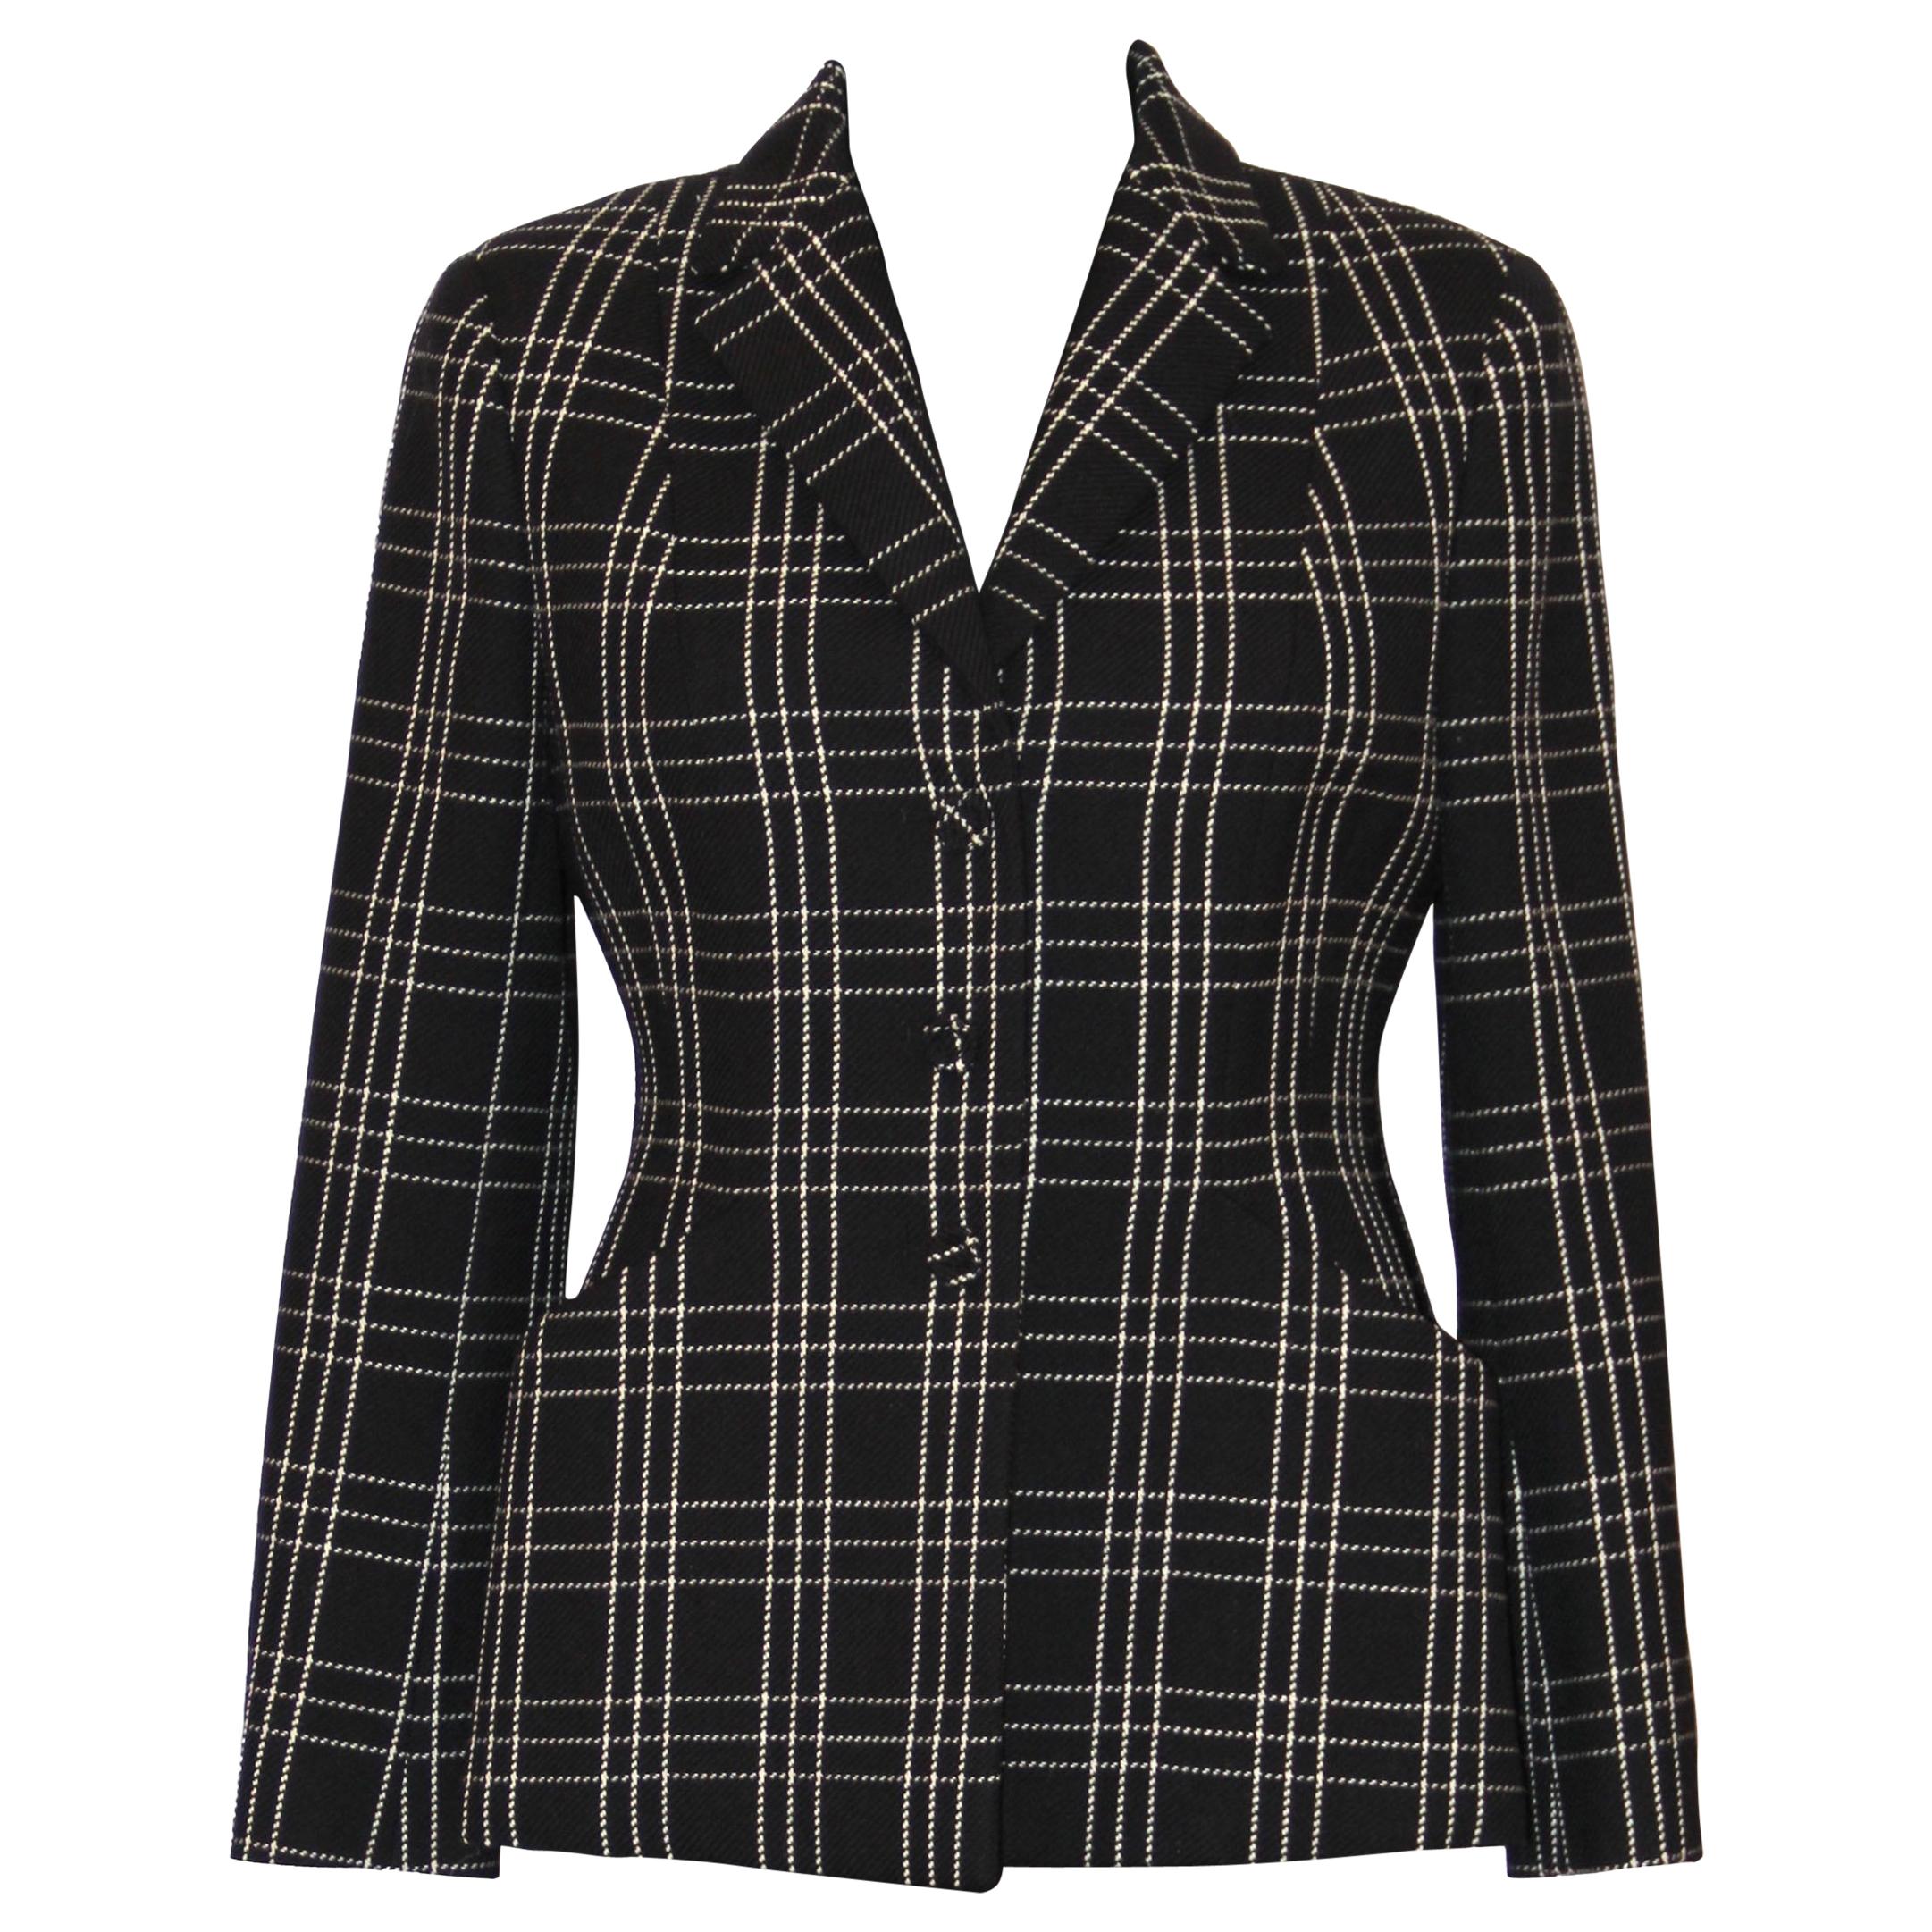 Dior - 30 Montaigne Bar Jacket Black and White Single-Breasted Houndstooth Wool - Size 44 - Women